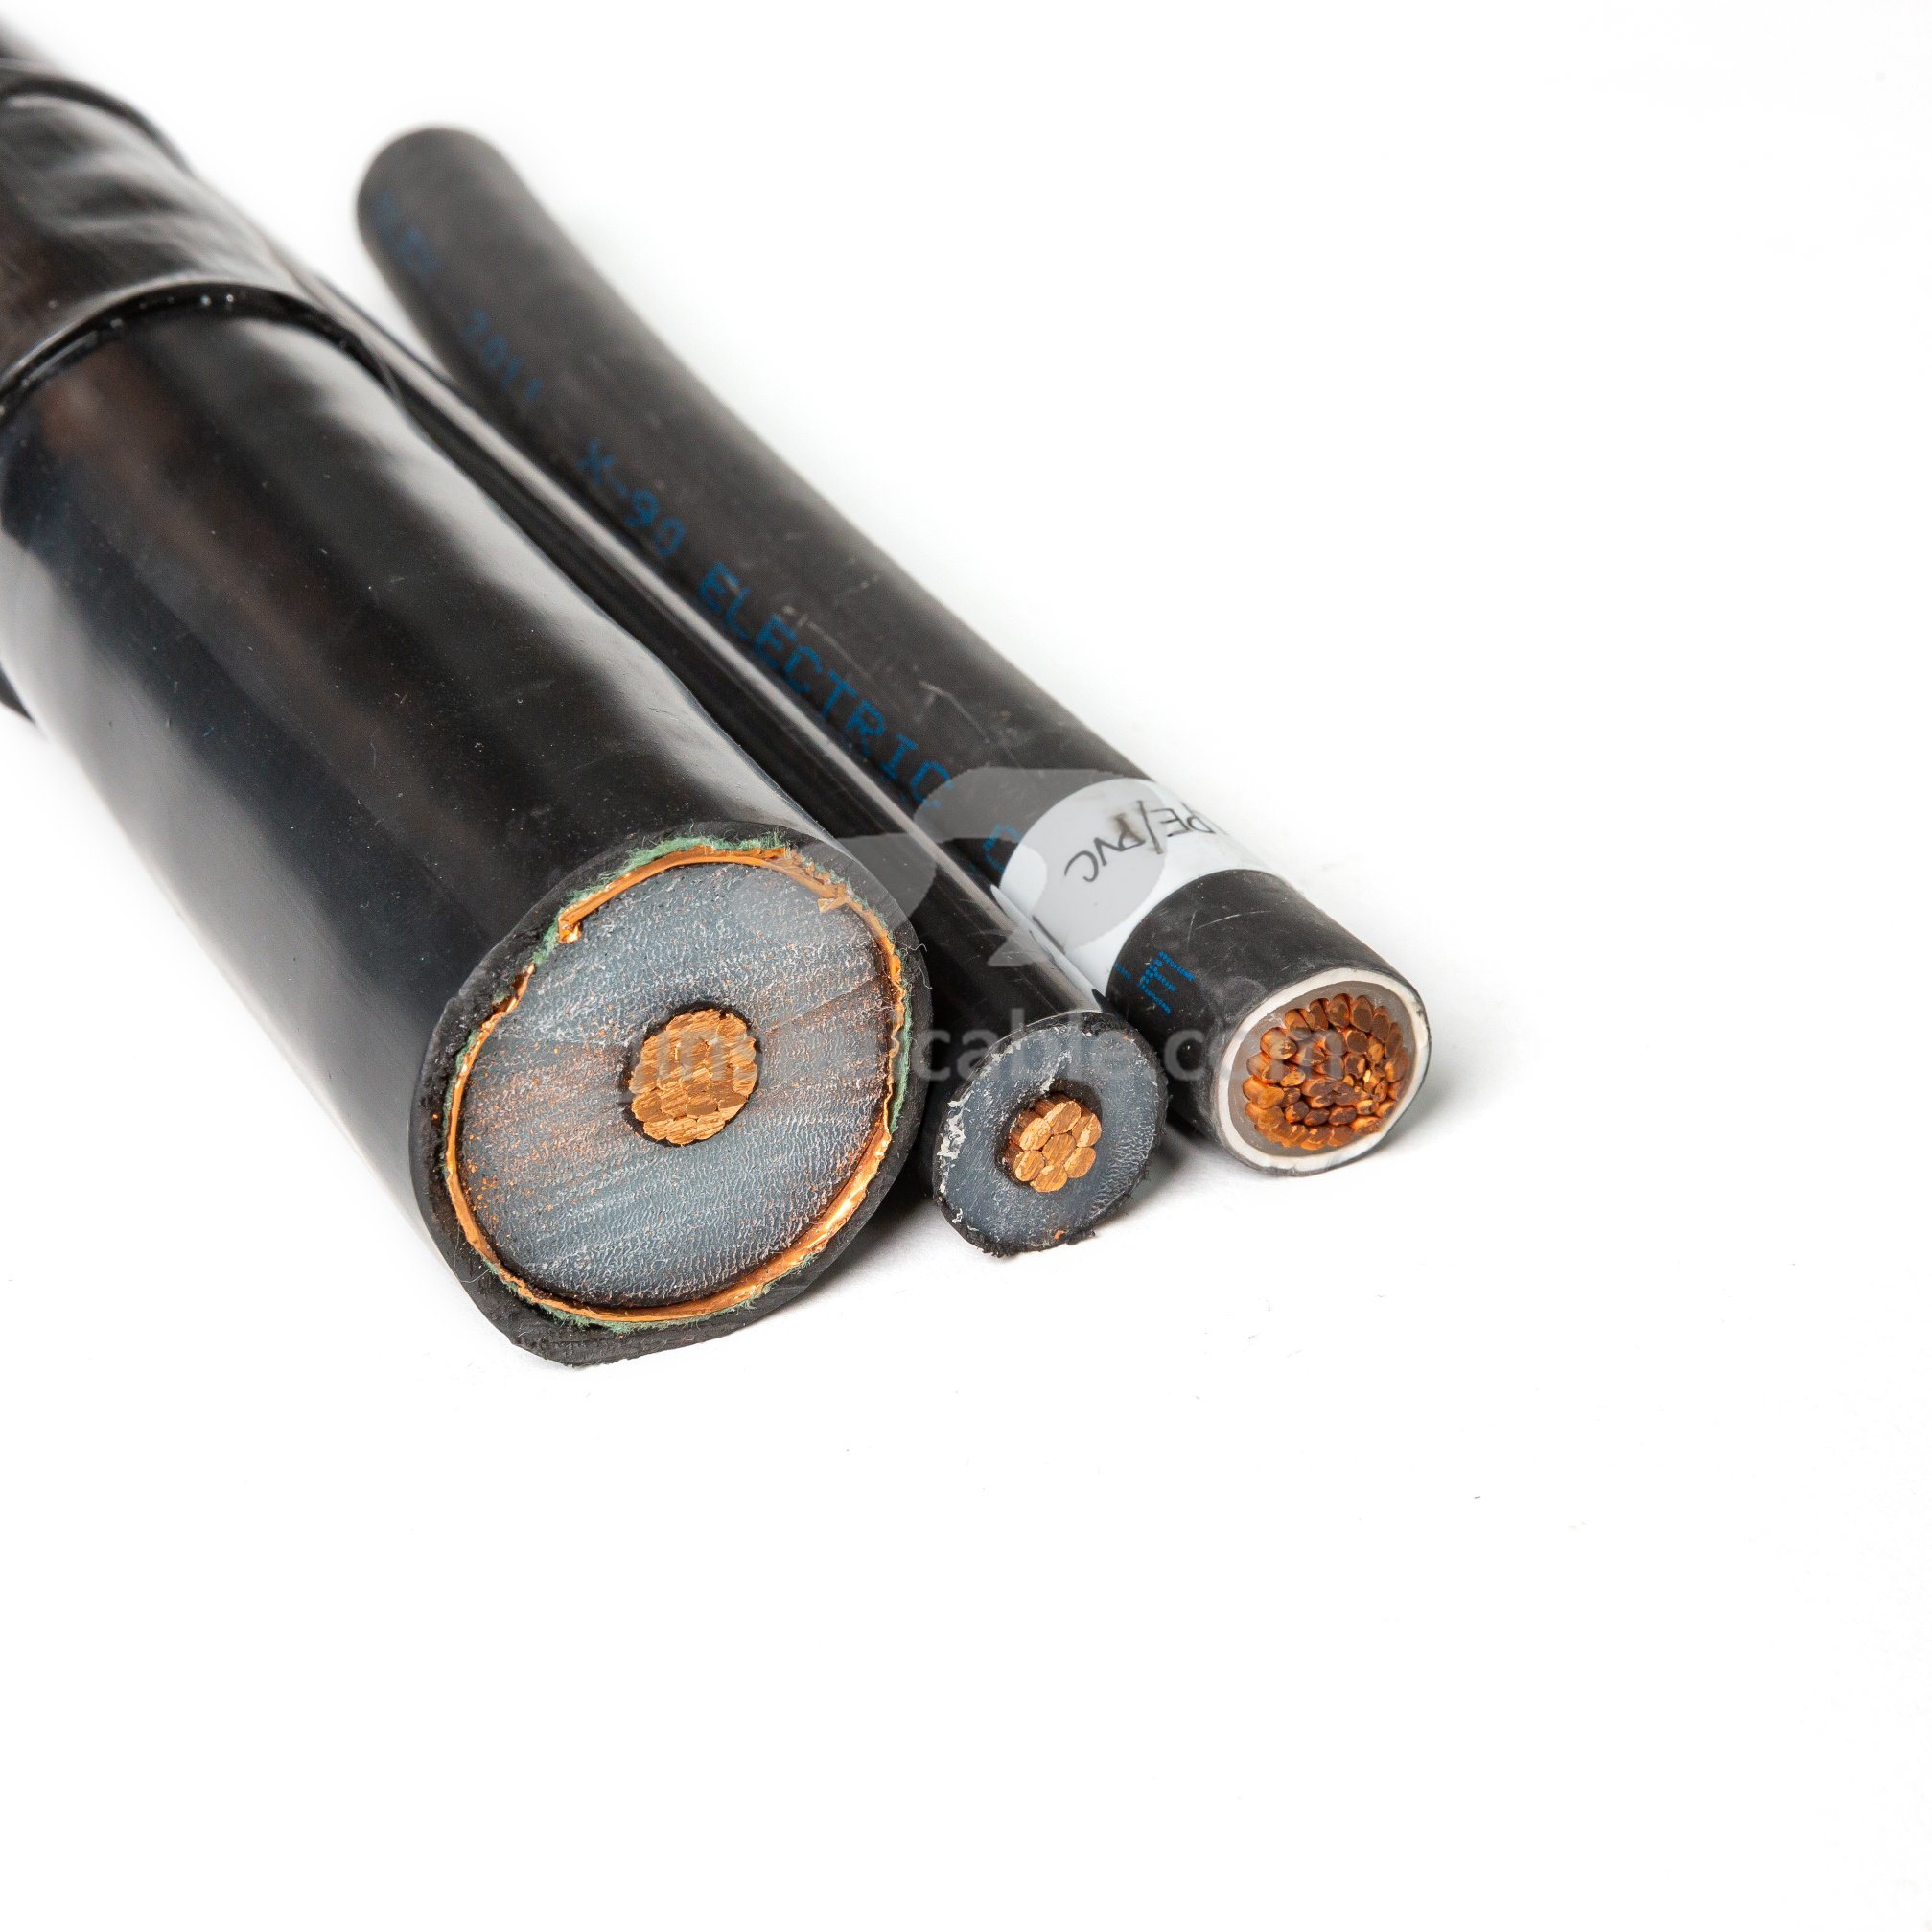 Armoured Power Cable XLPE/Swa/PVC Cu Armored Cable 3 Core LV Power Cable 120mm2 IEC 60502-1